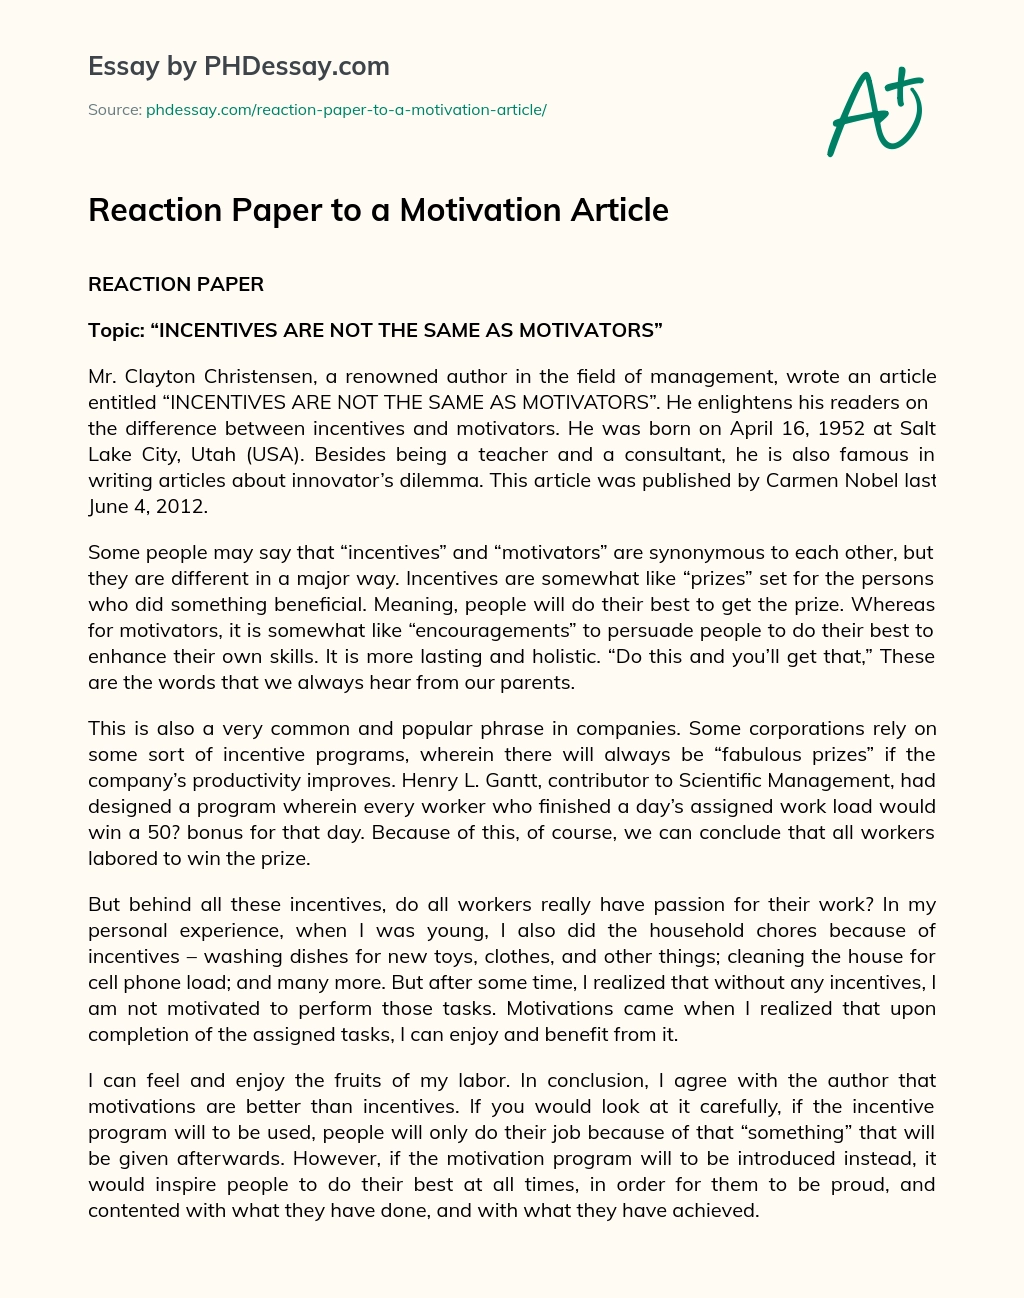 Reaction Paper to a Motivation Article essay